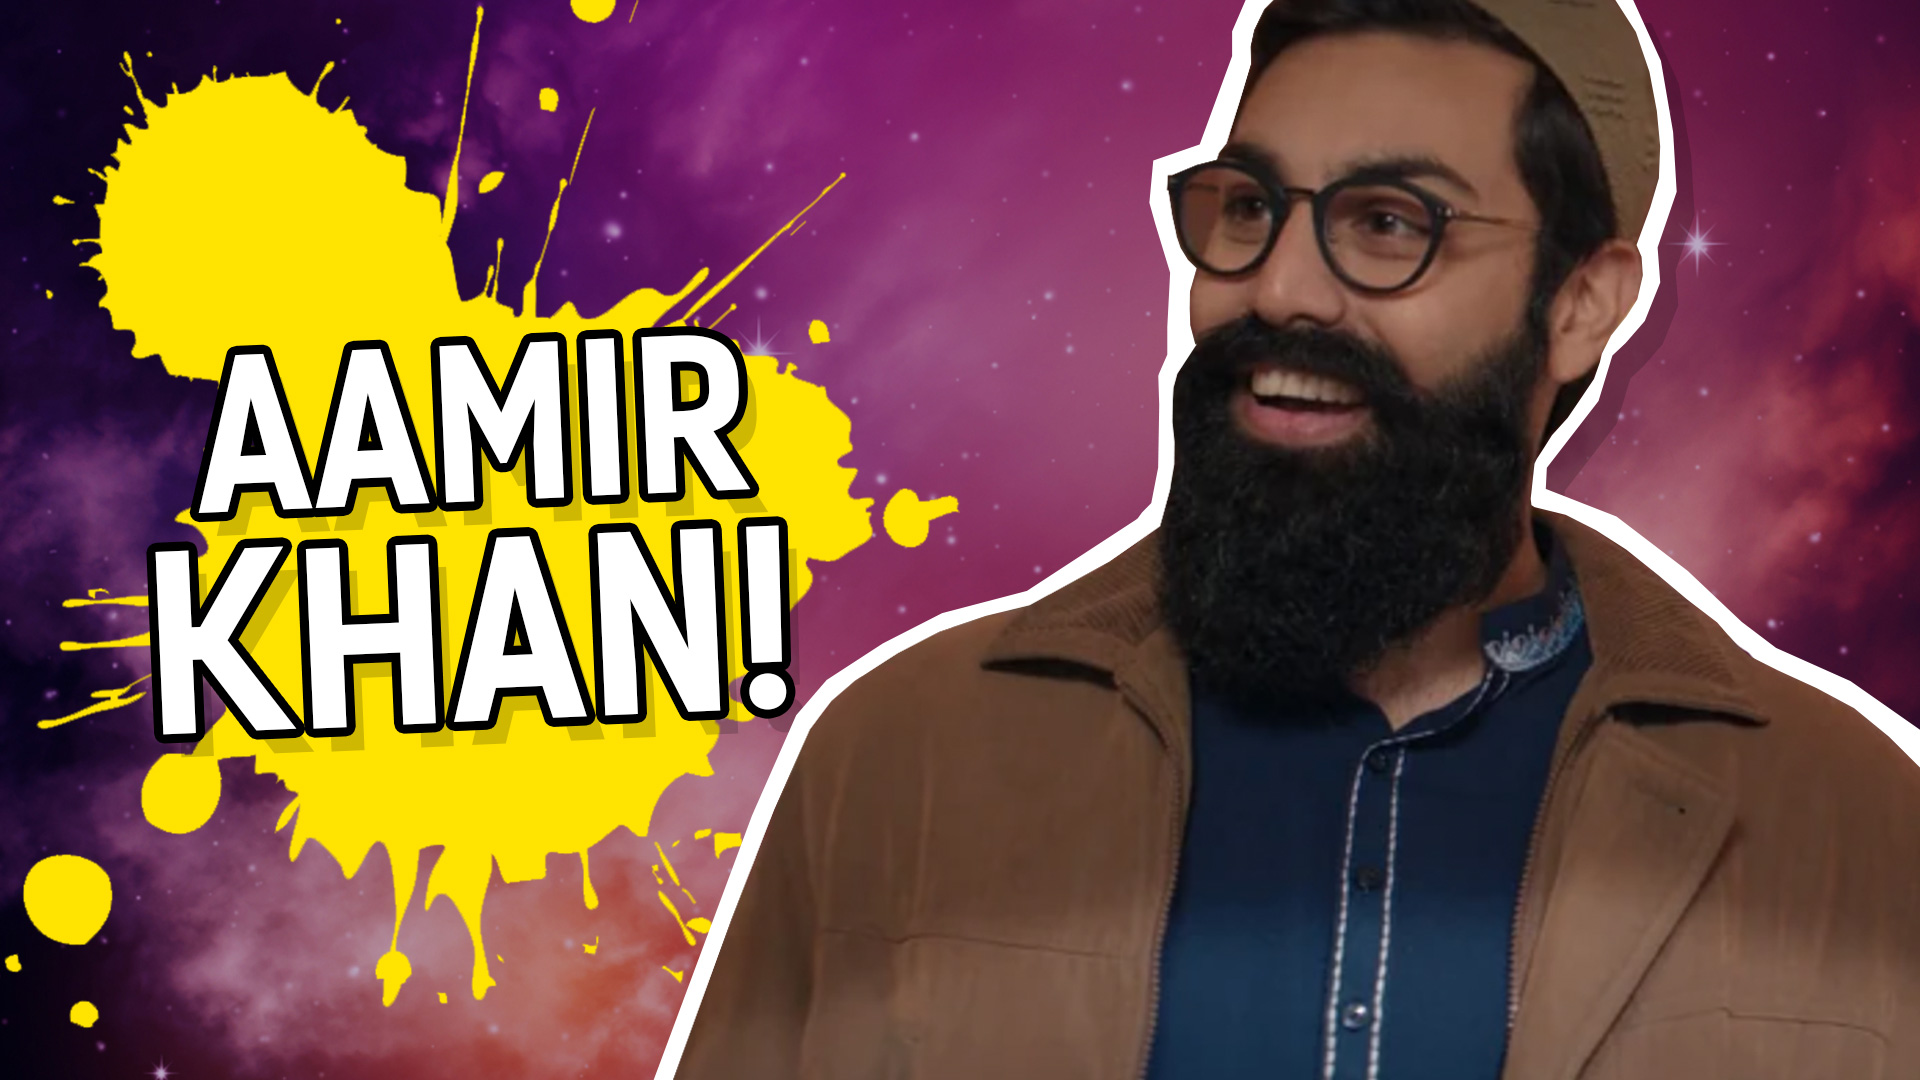 You are: Aamir Khan